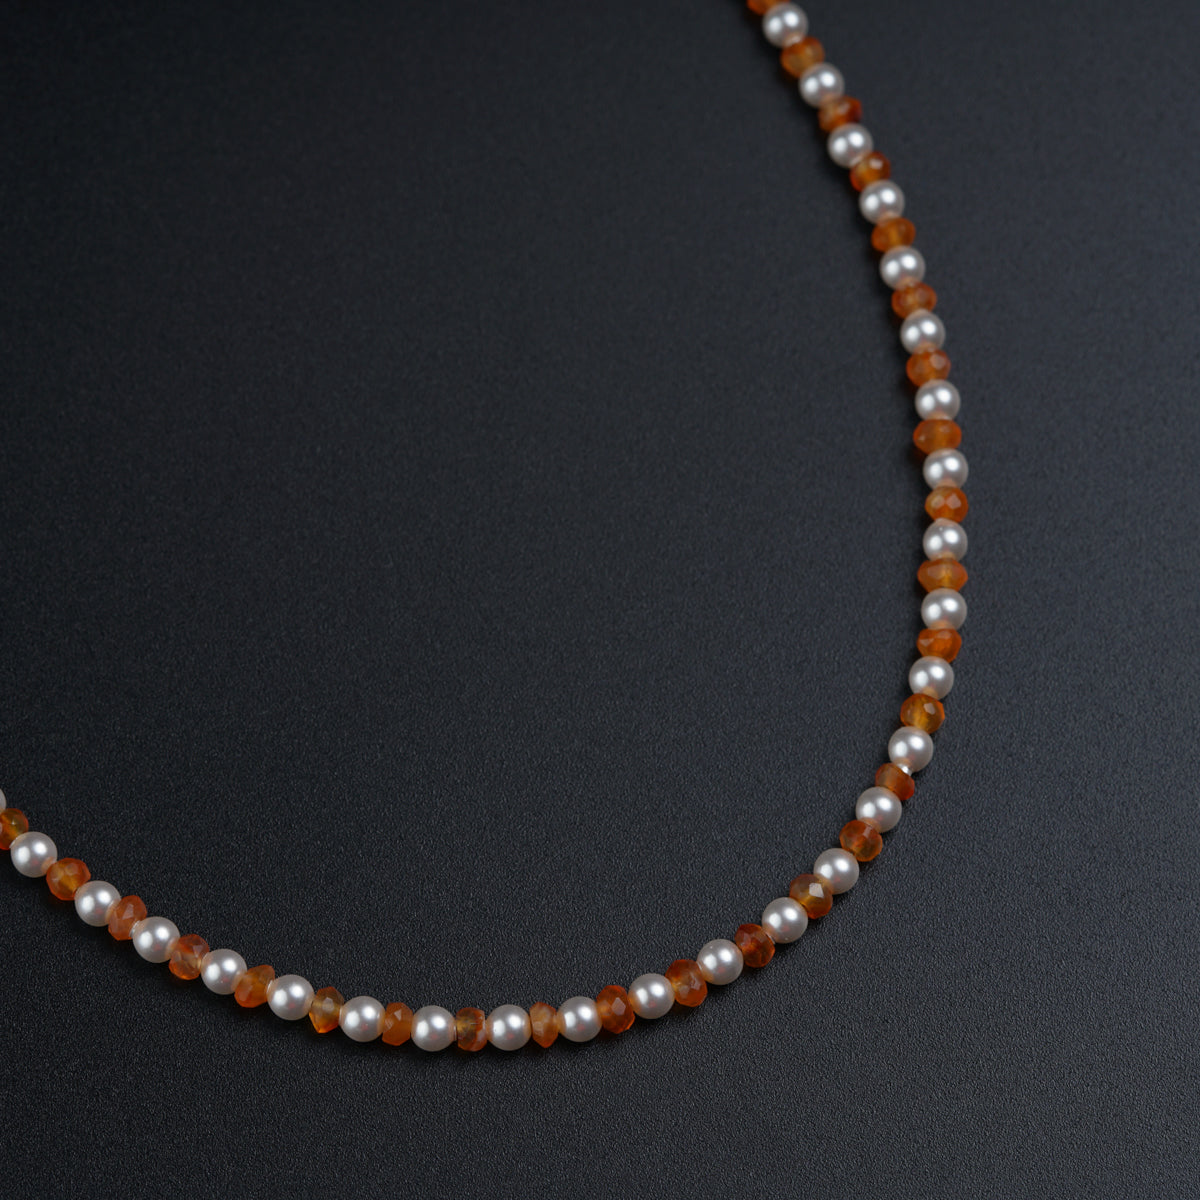 Daily Wear Necklace-Carnelian and Pearls